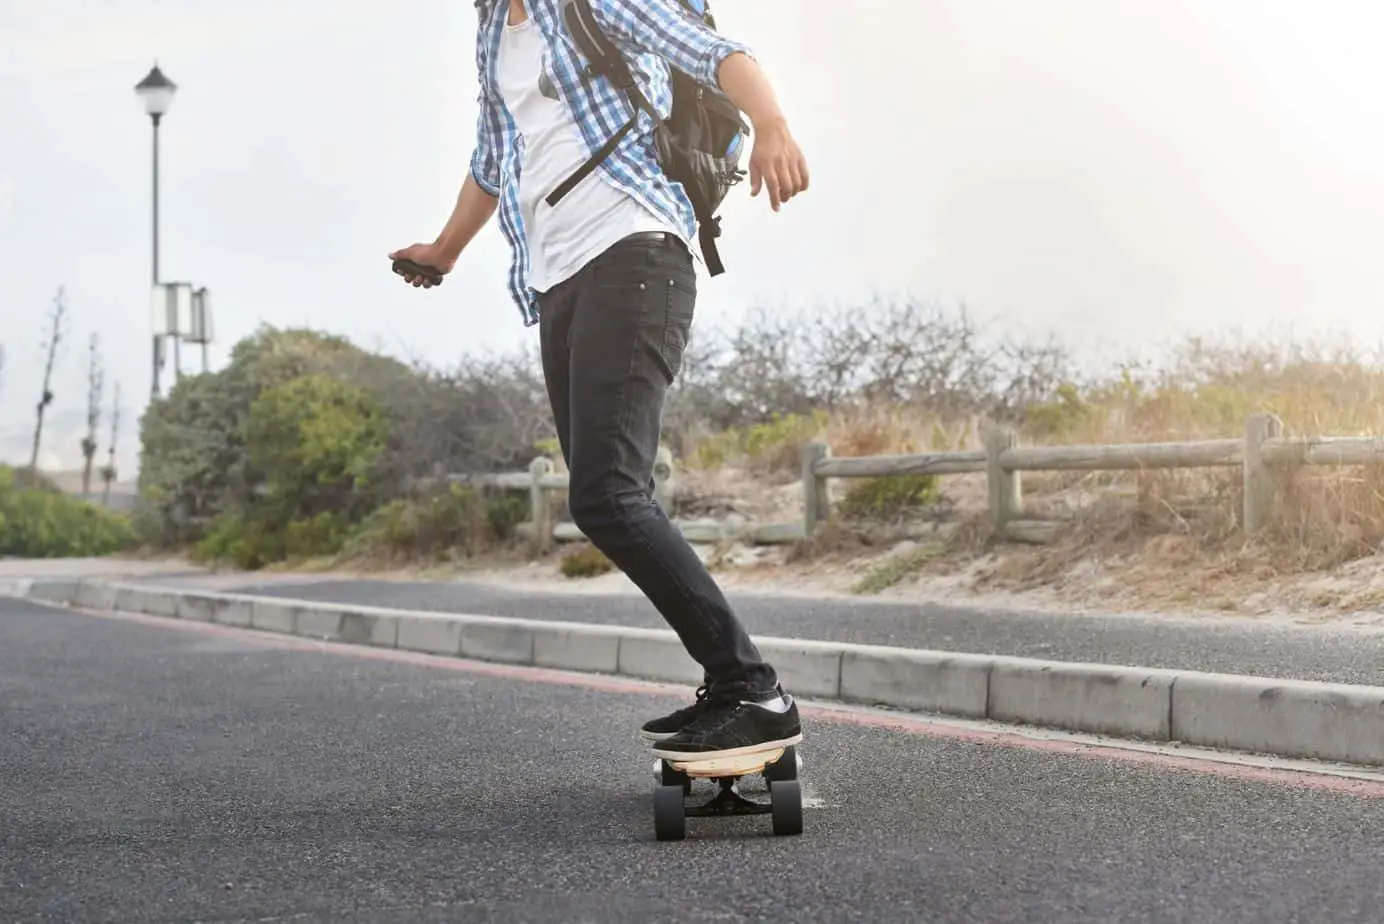 The Best Electric Skateboards For College